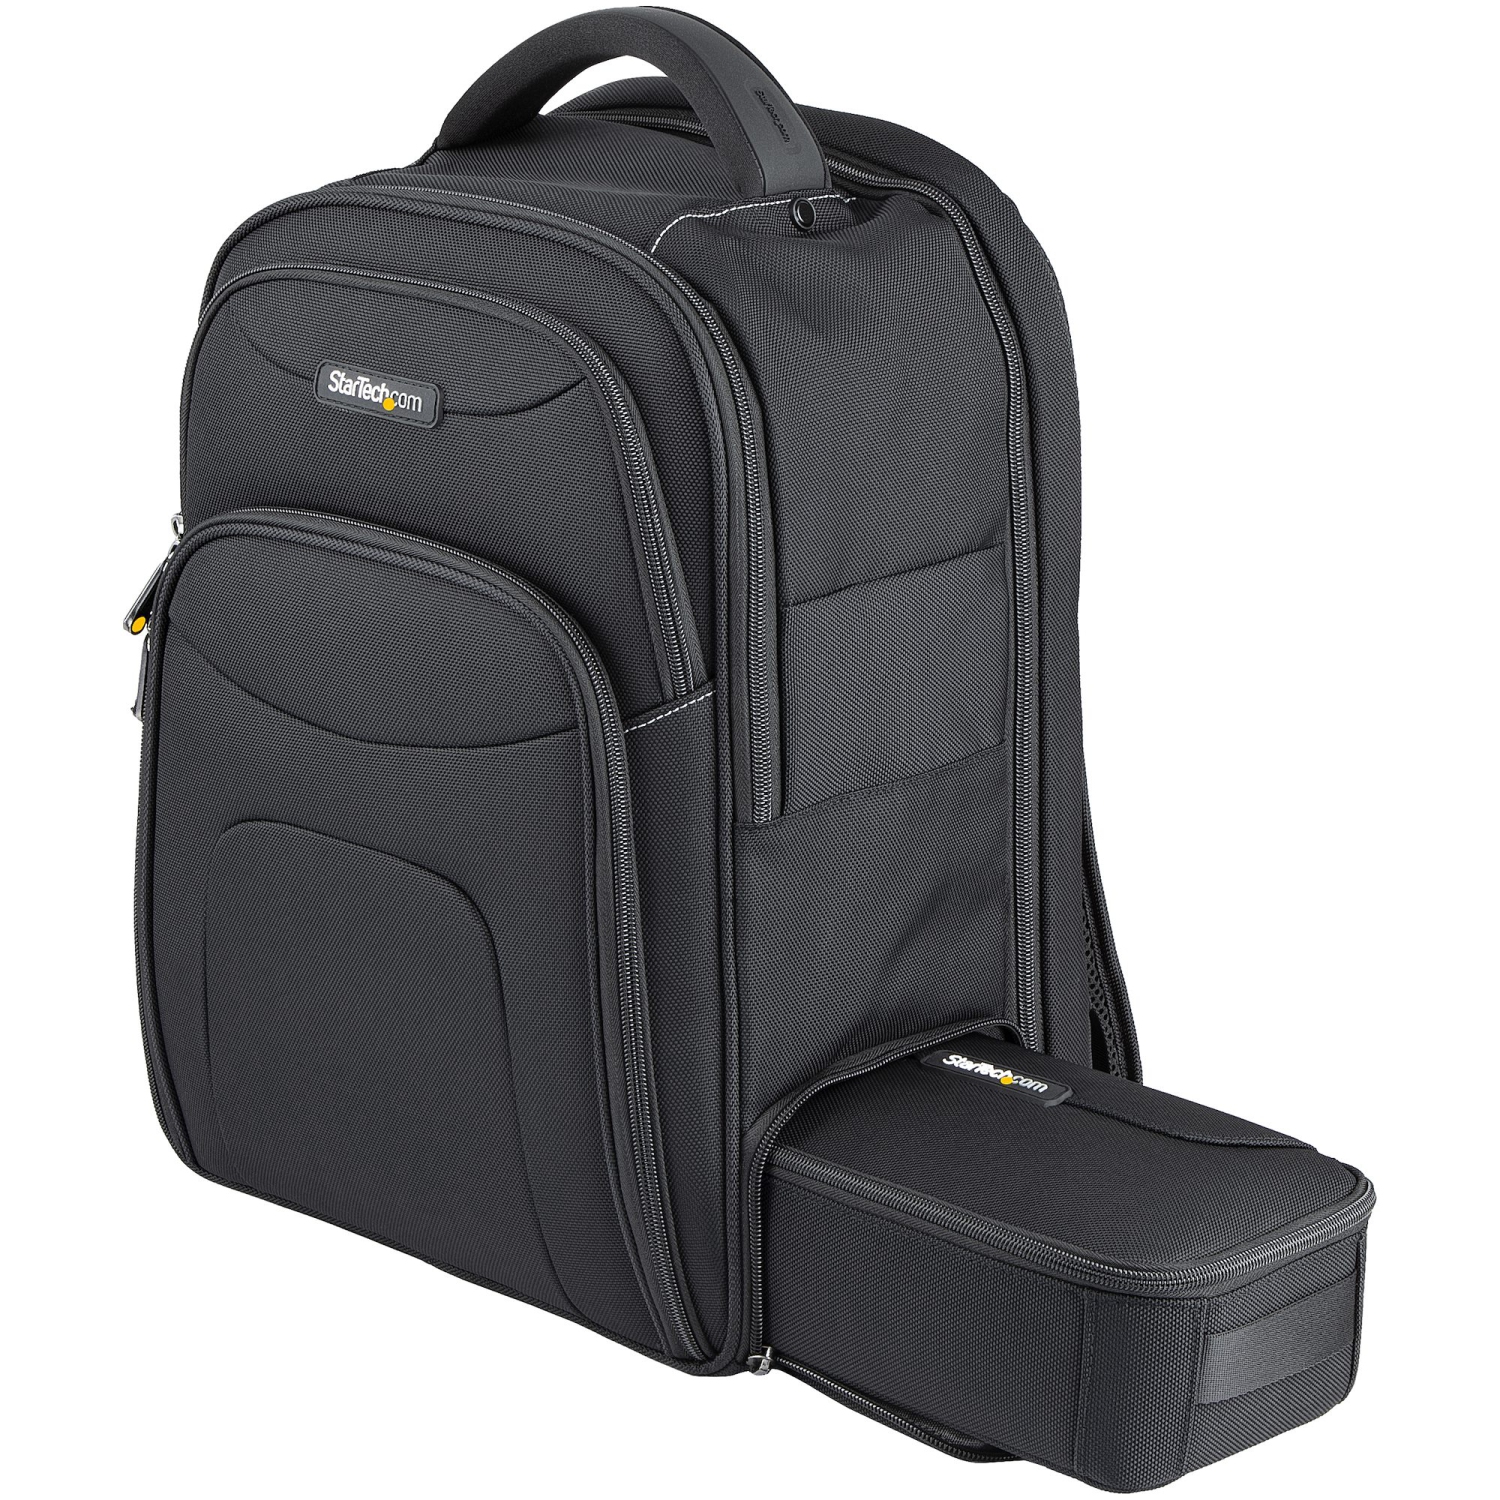 Startech 15.6" Laptop Backpack with Removable Accessory Organizer Case - (NTBKBAG156)